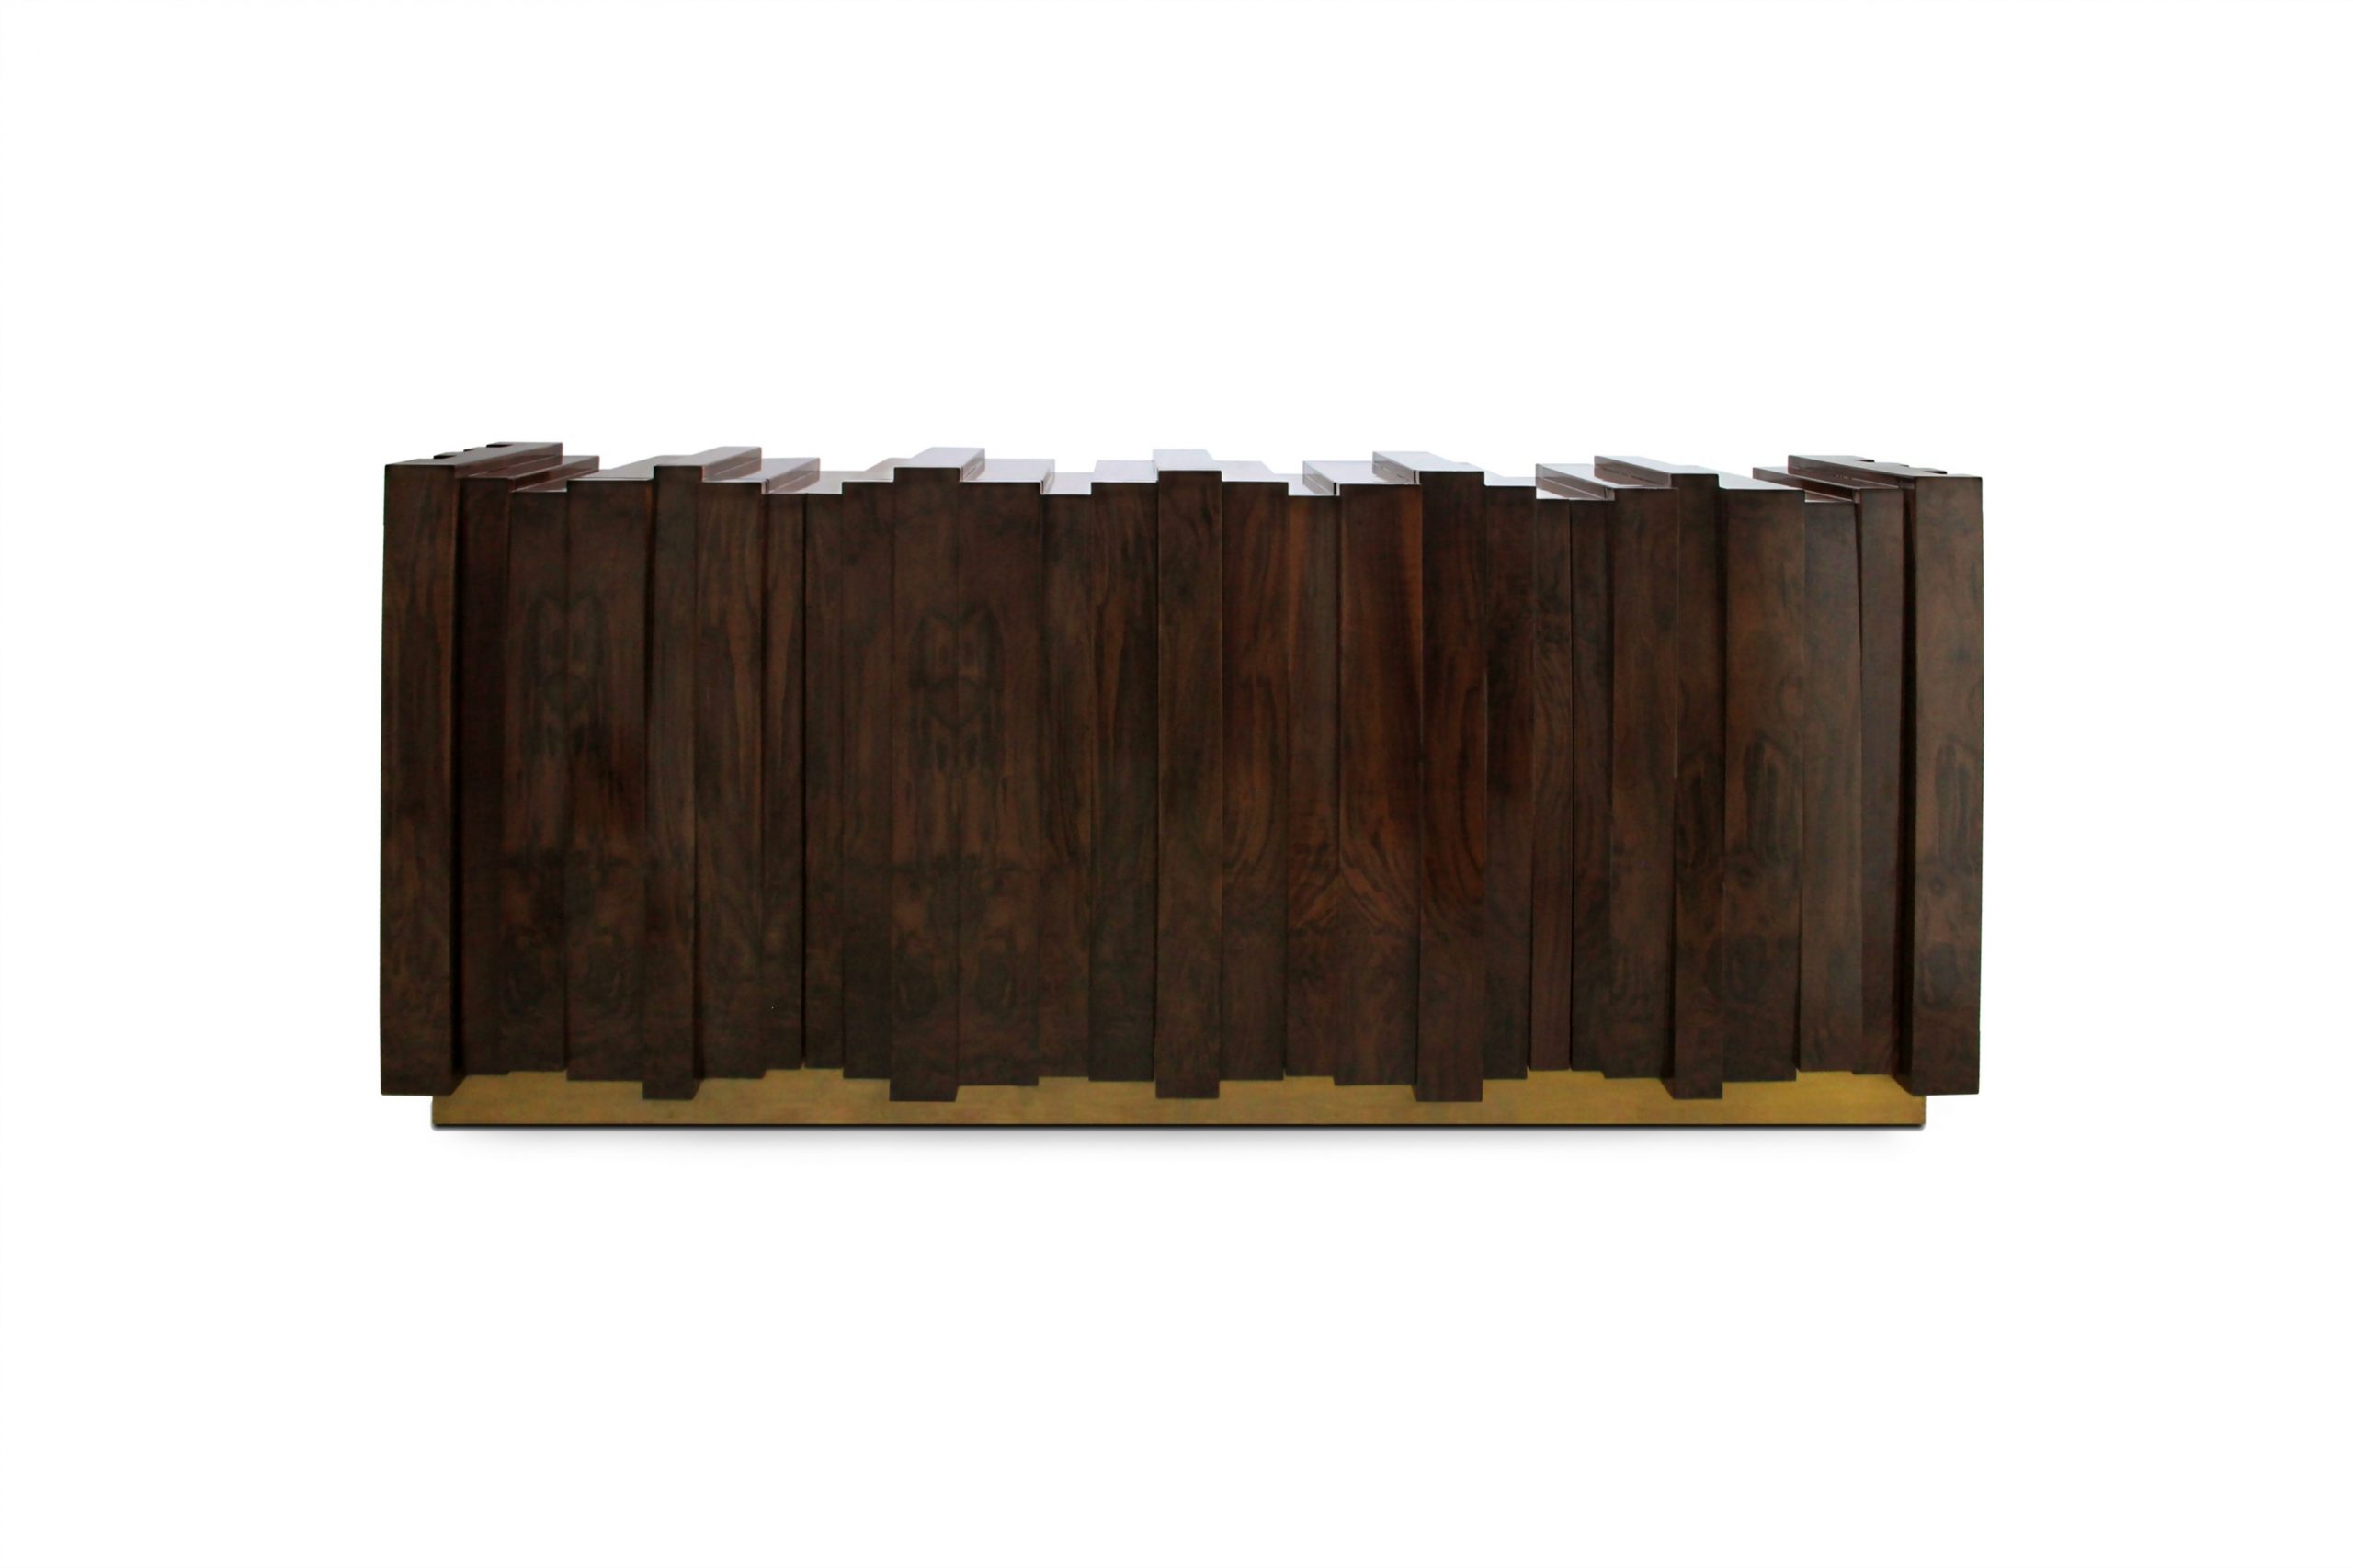 BRABBU Sideboards to Upgrade Your Home Decor